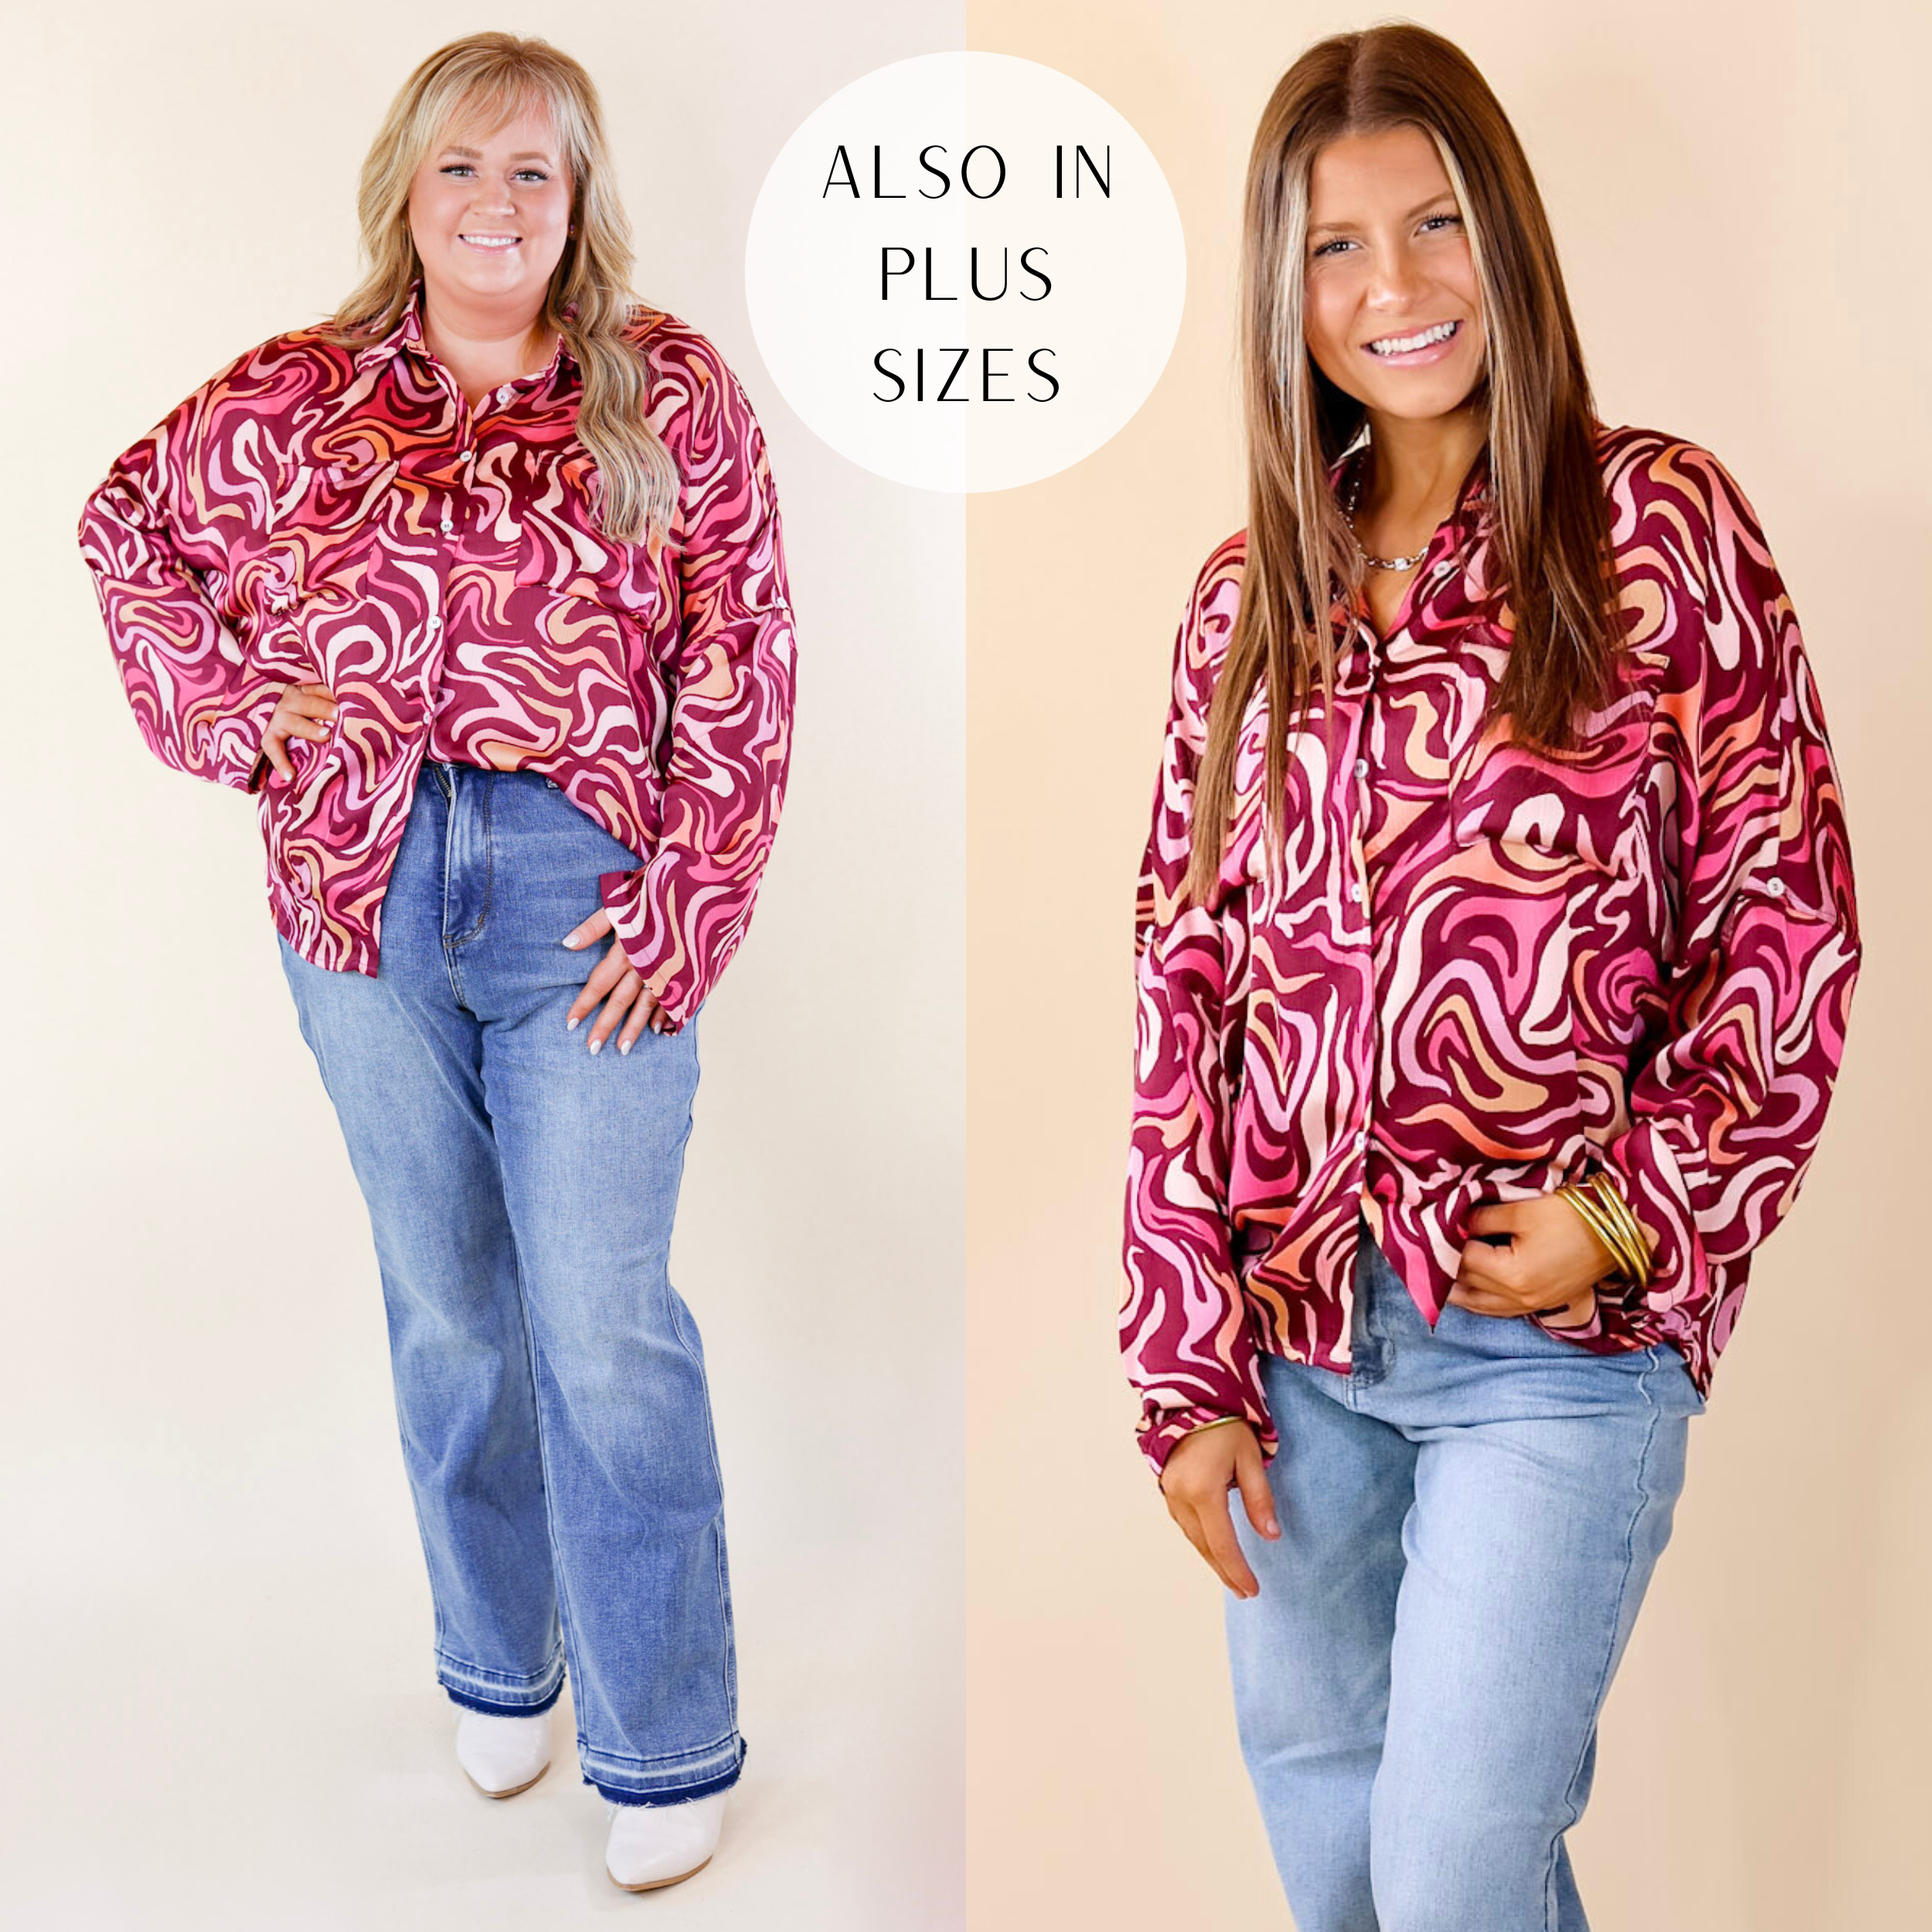 Model is wearing a swirl print button up top in magenta purple. Model has paired the top with light wash jeans, silver and white sneakers, and gold tone jewelry.